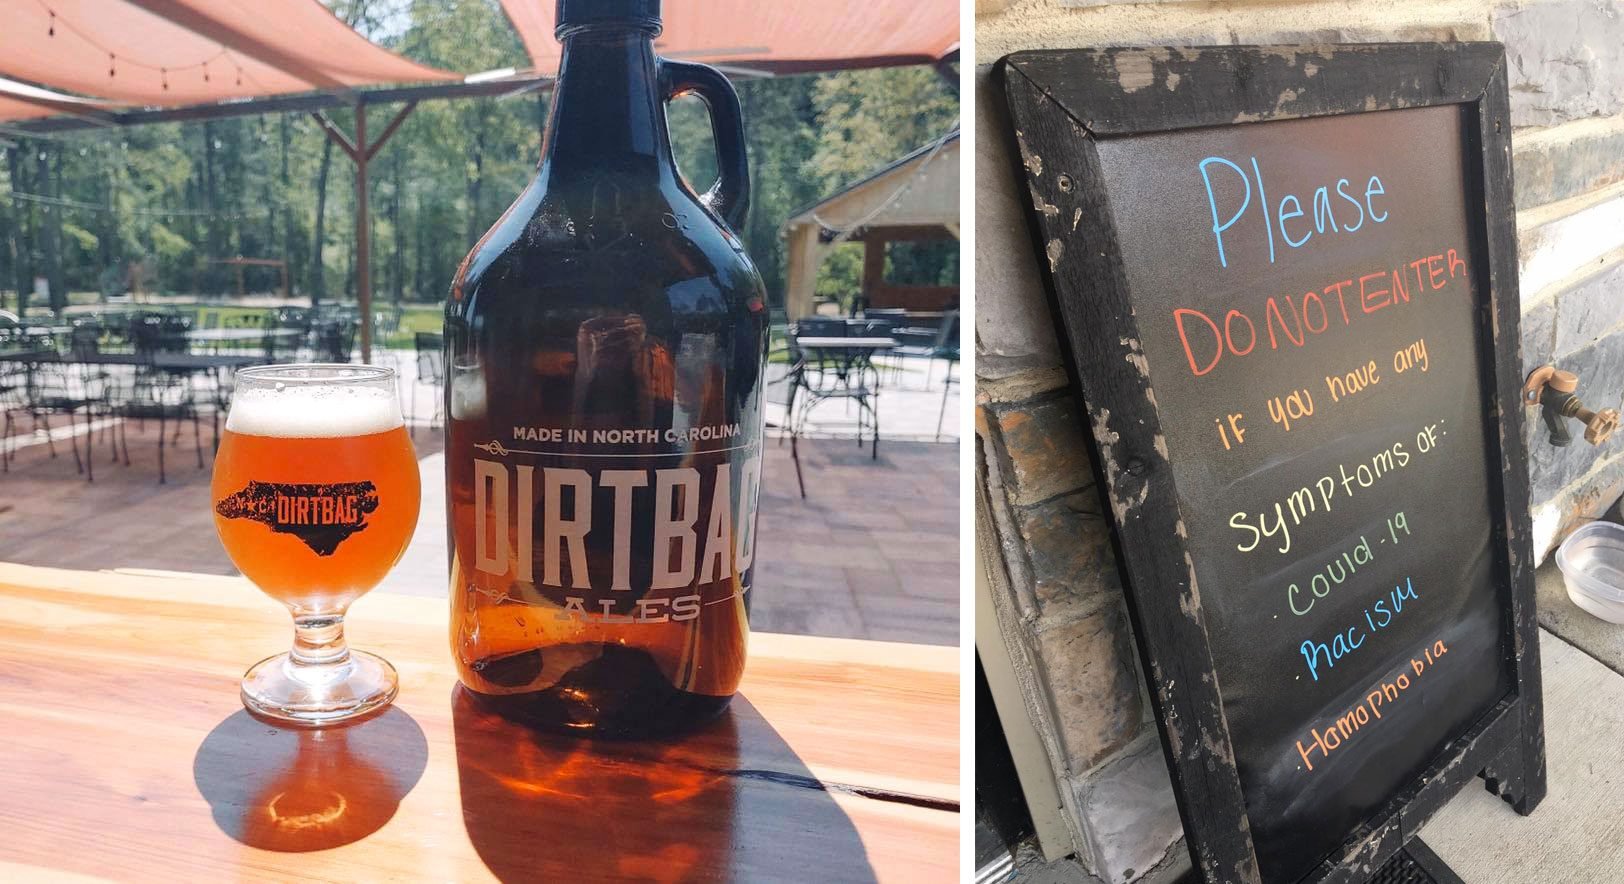 dirtbag ales brewery: patio and "rules" sign